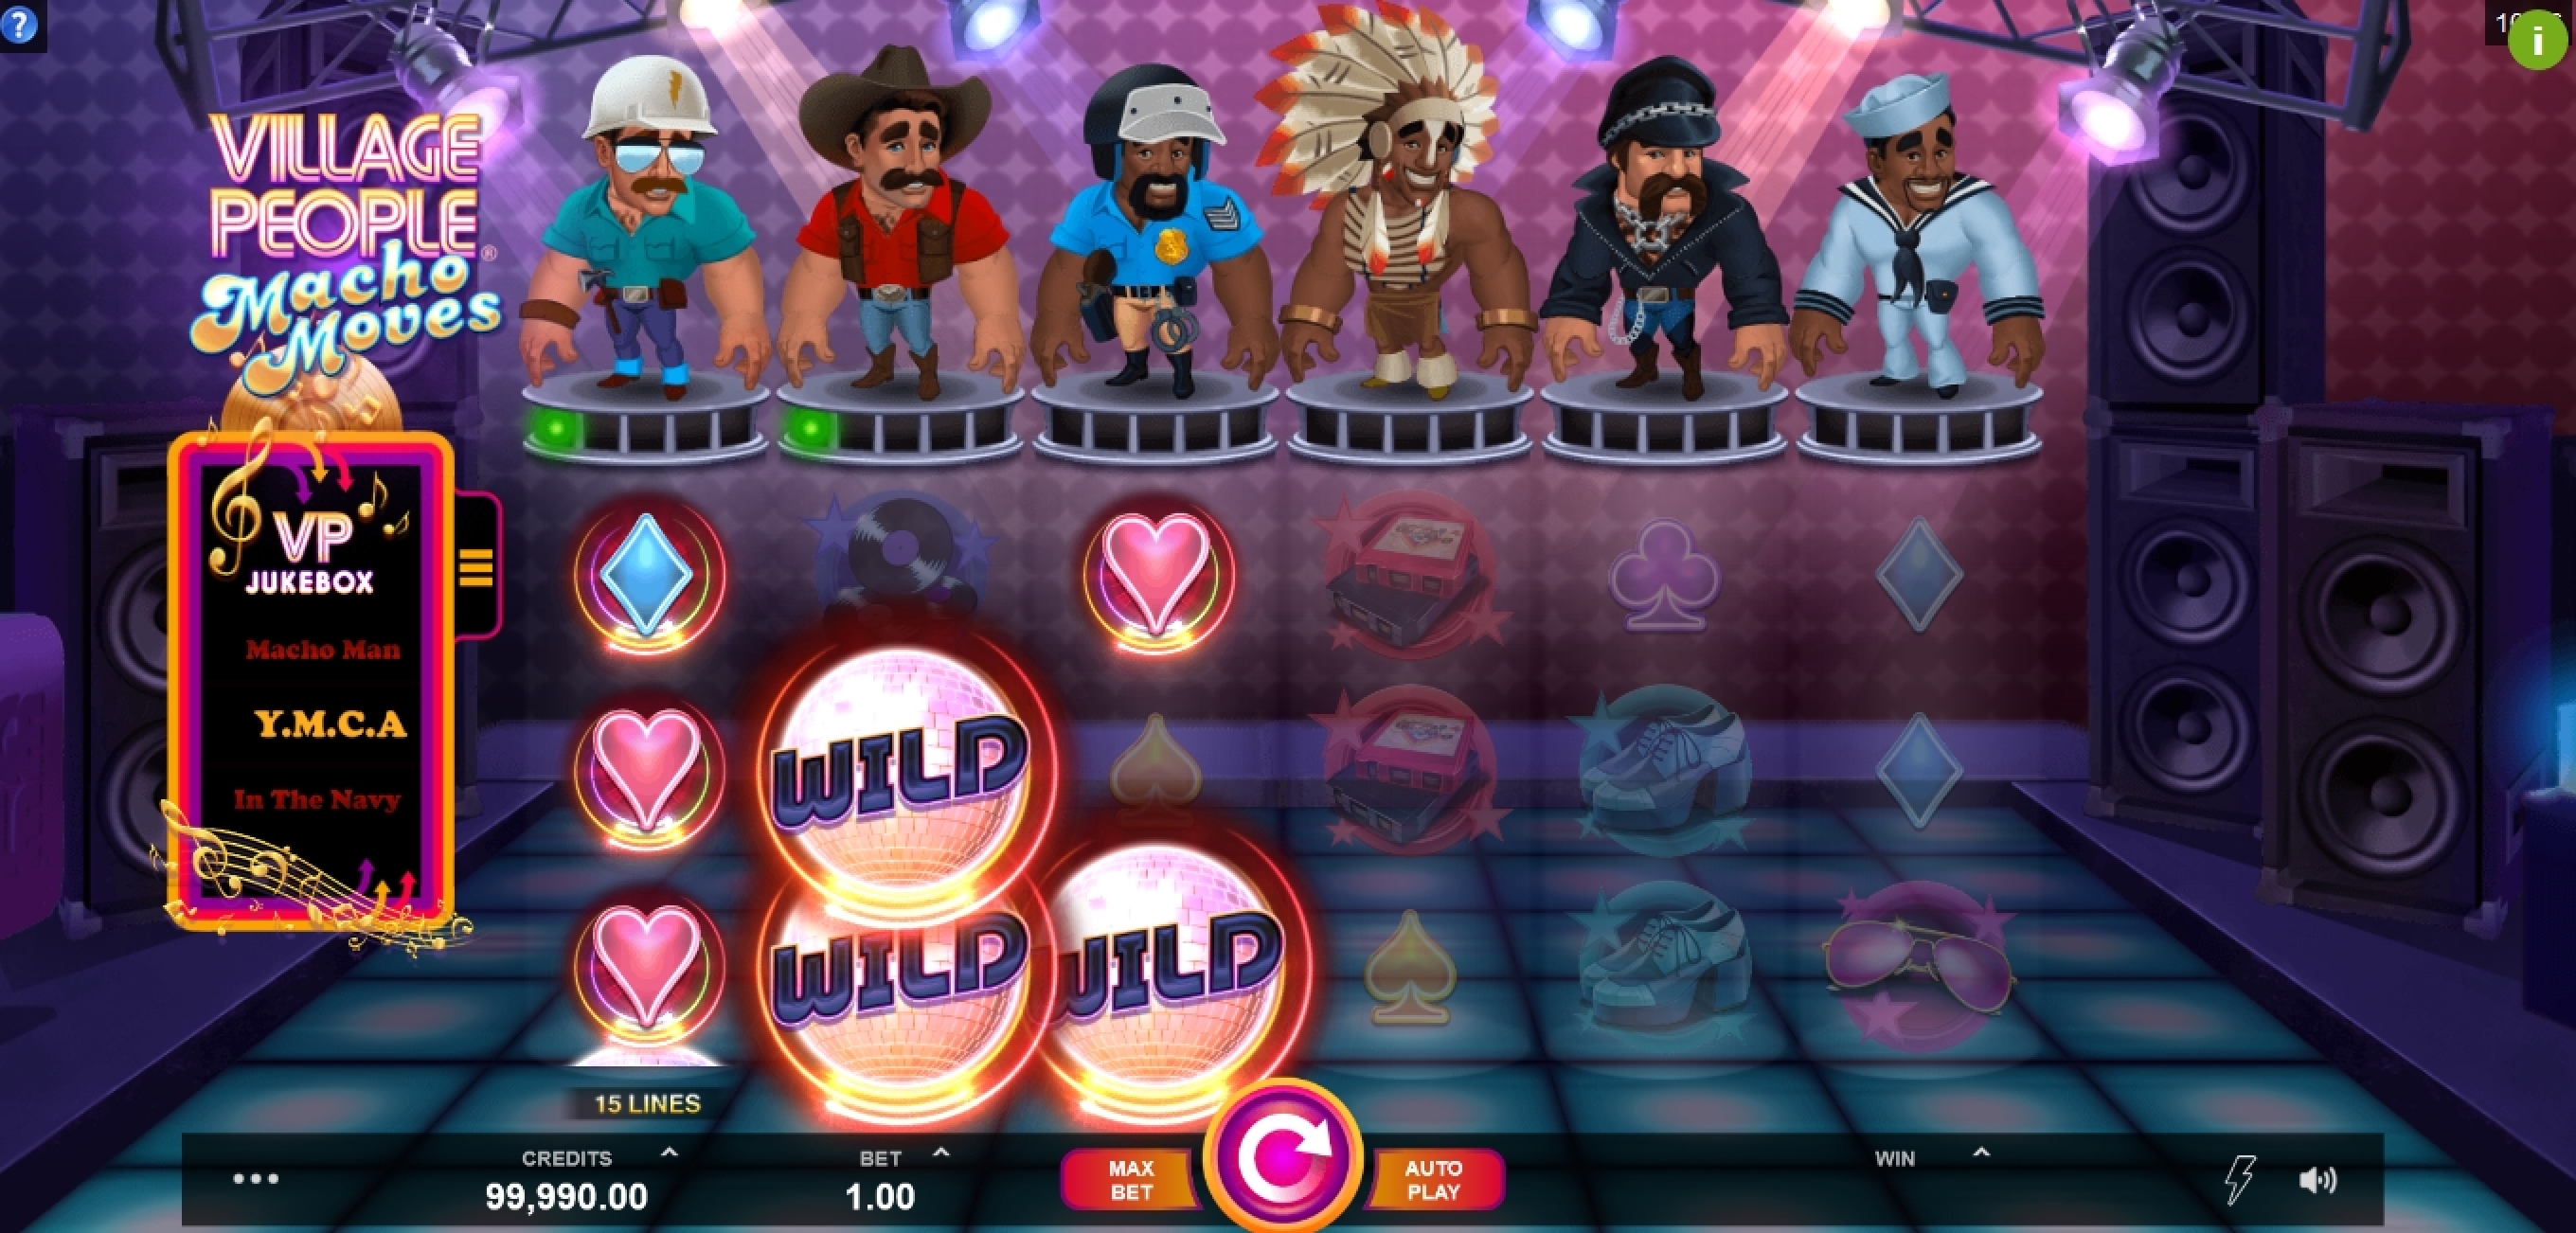 Win Money in Village People Macho Moves Free Slot Game by Fortune Factory Studios